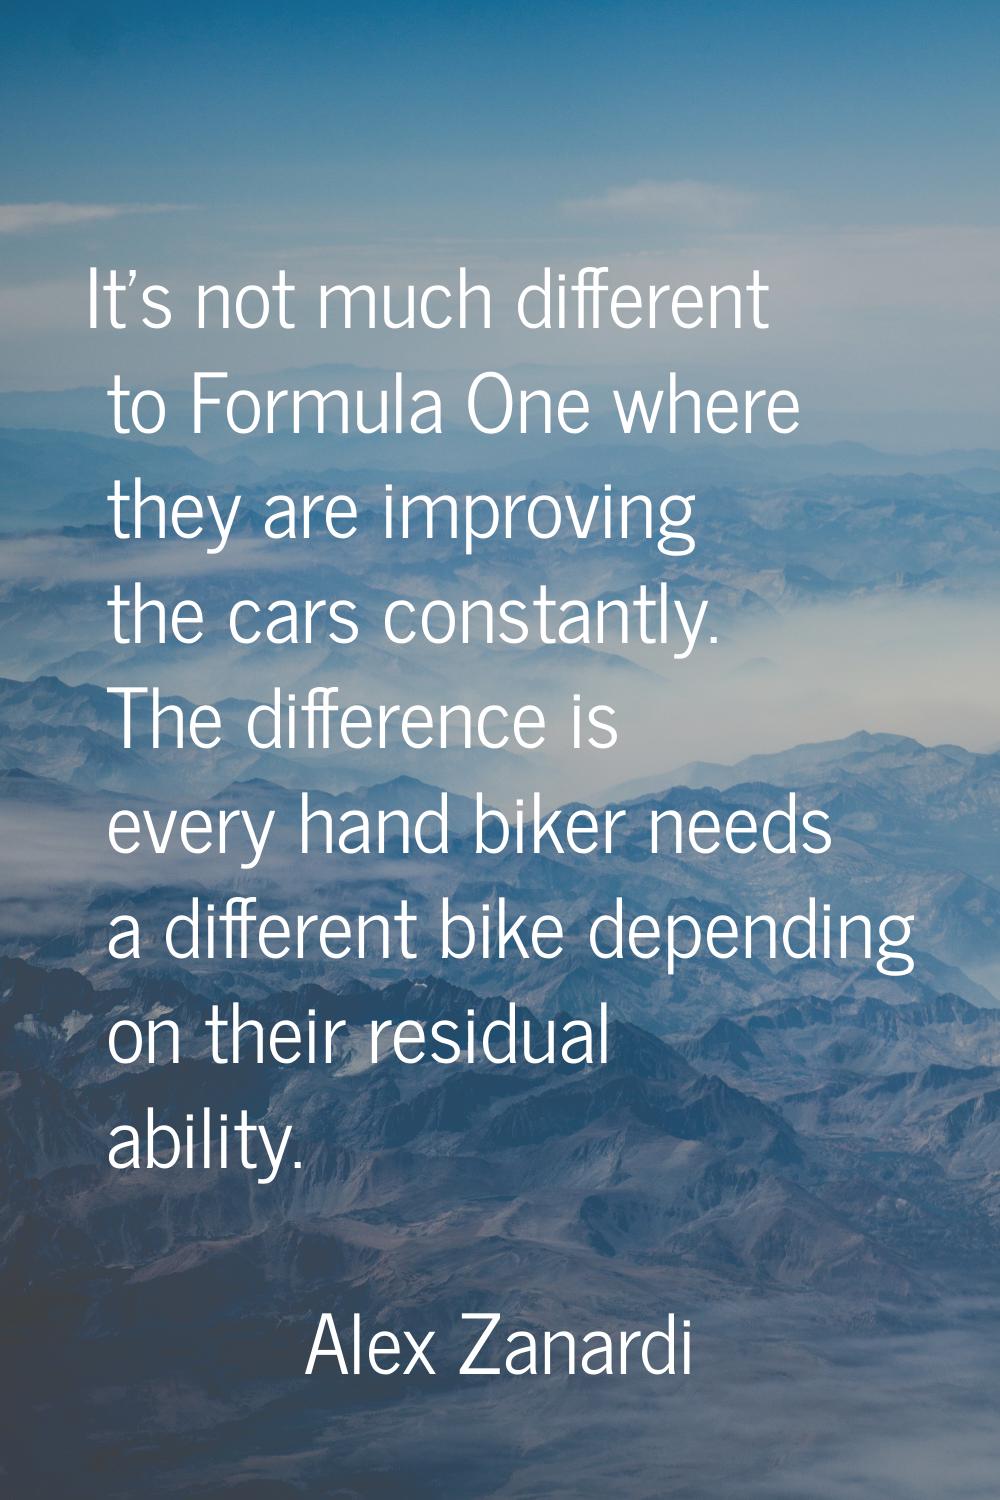 It's not much different to Formula One where they are improving the cars constantly. The difference